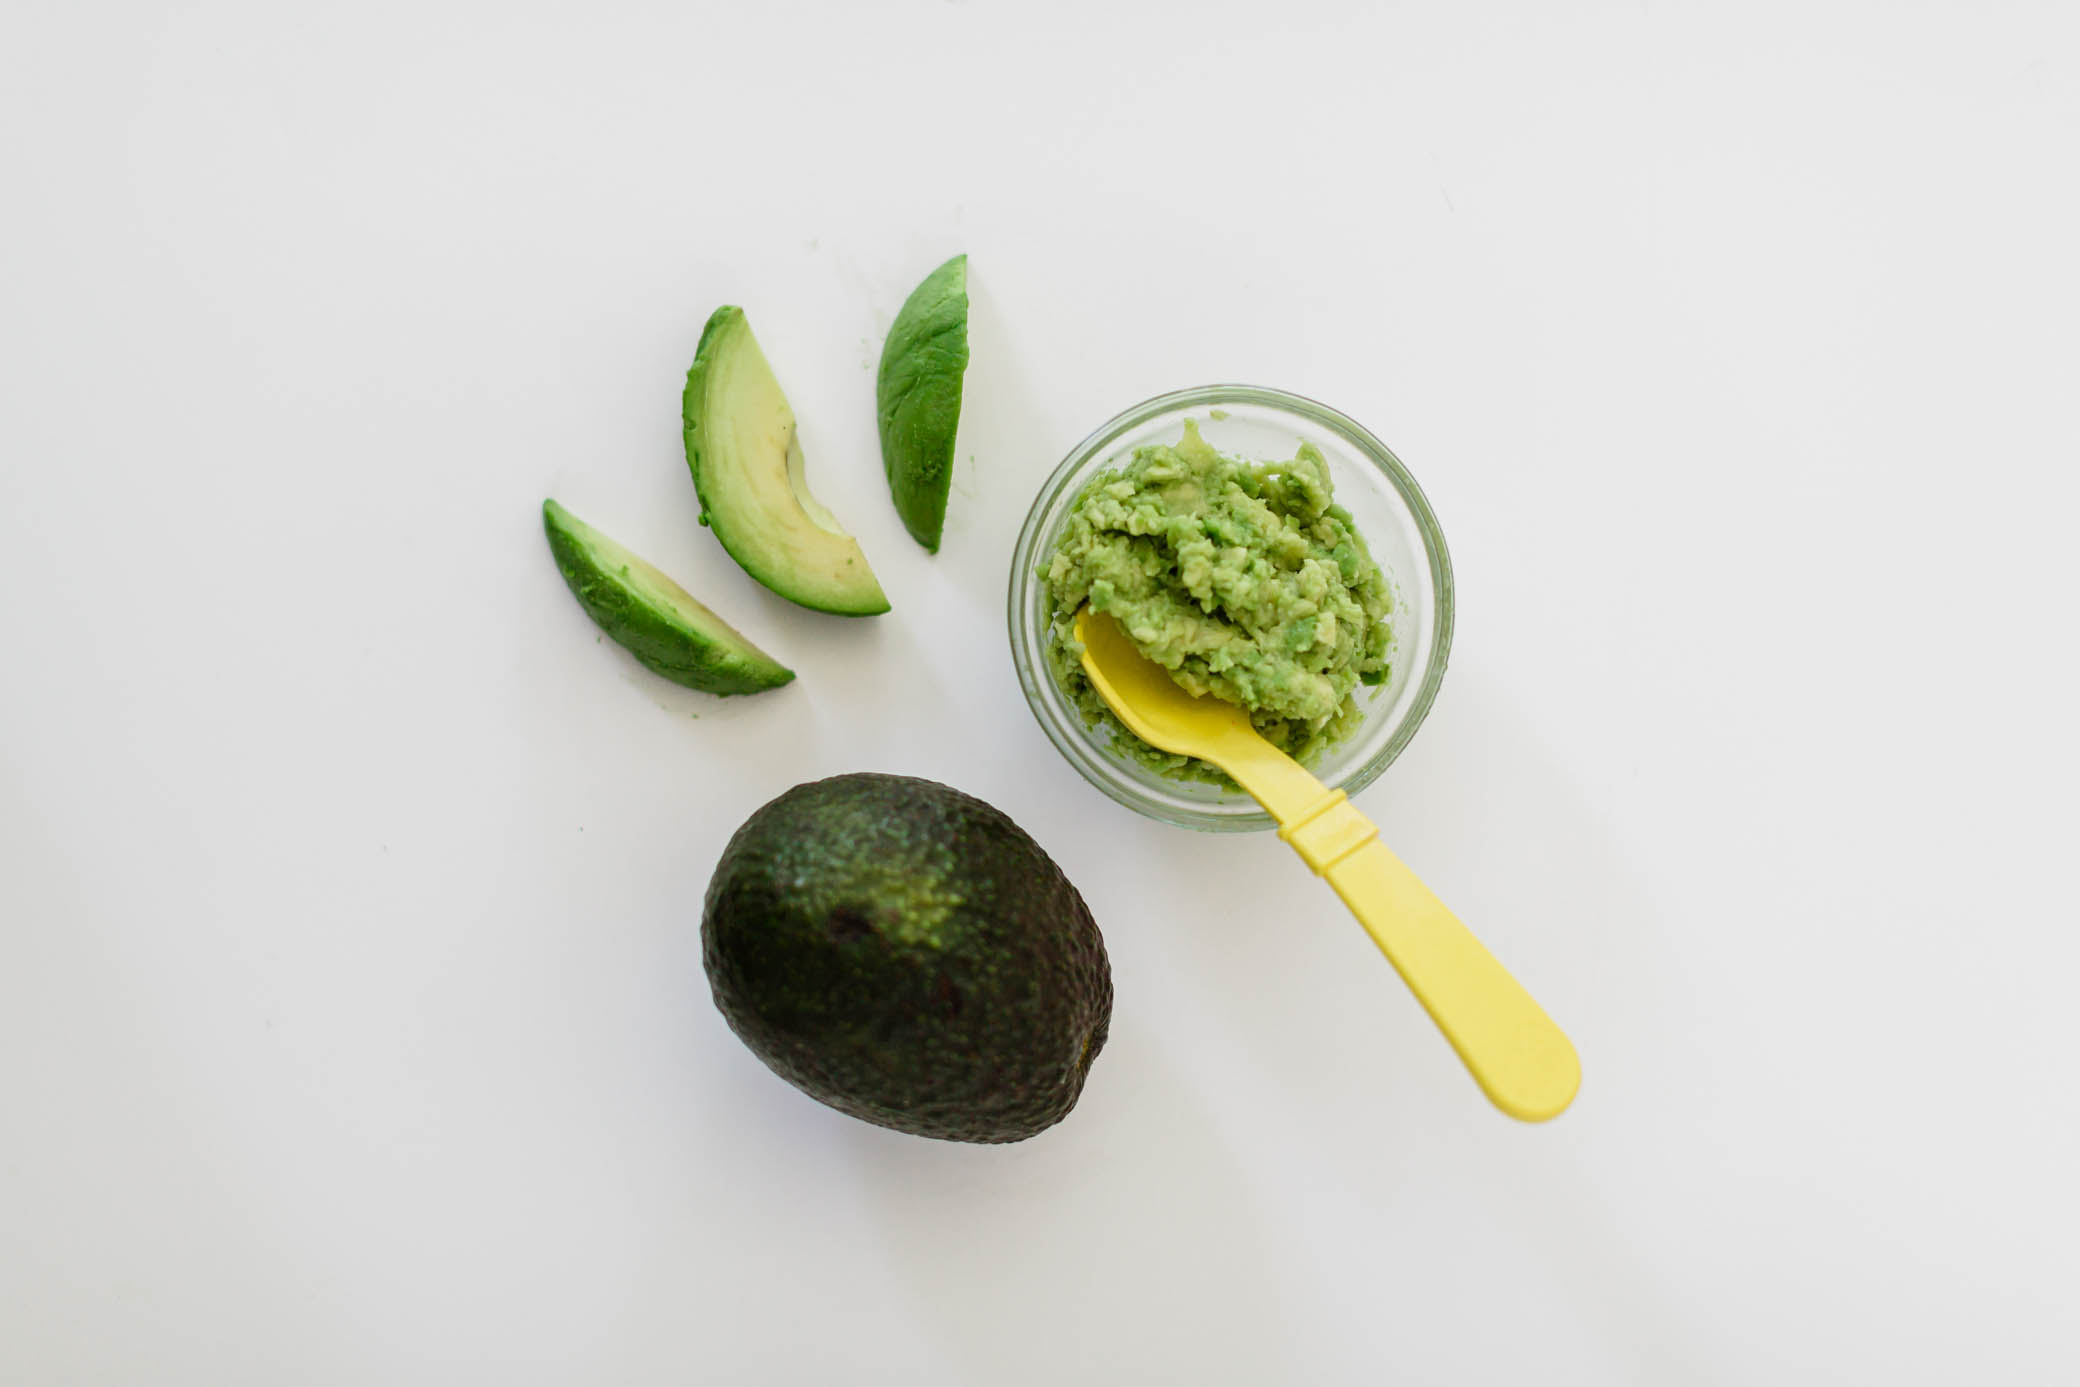 Avocado shown different ways to prepare to give to a baby.